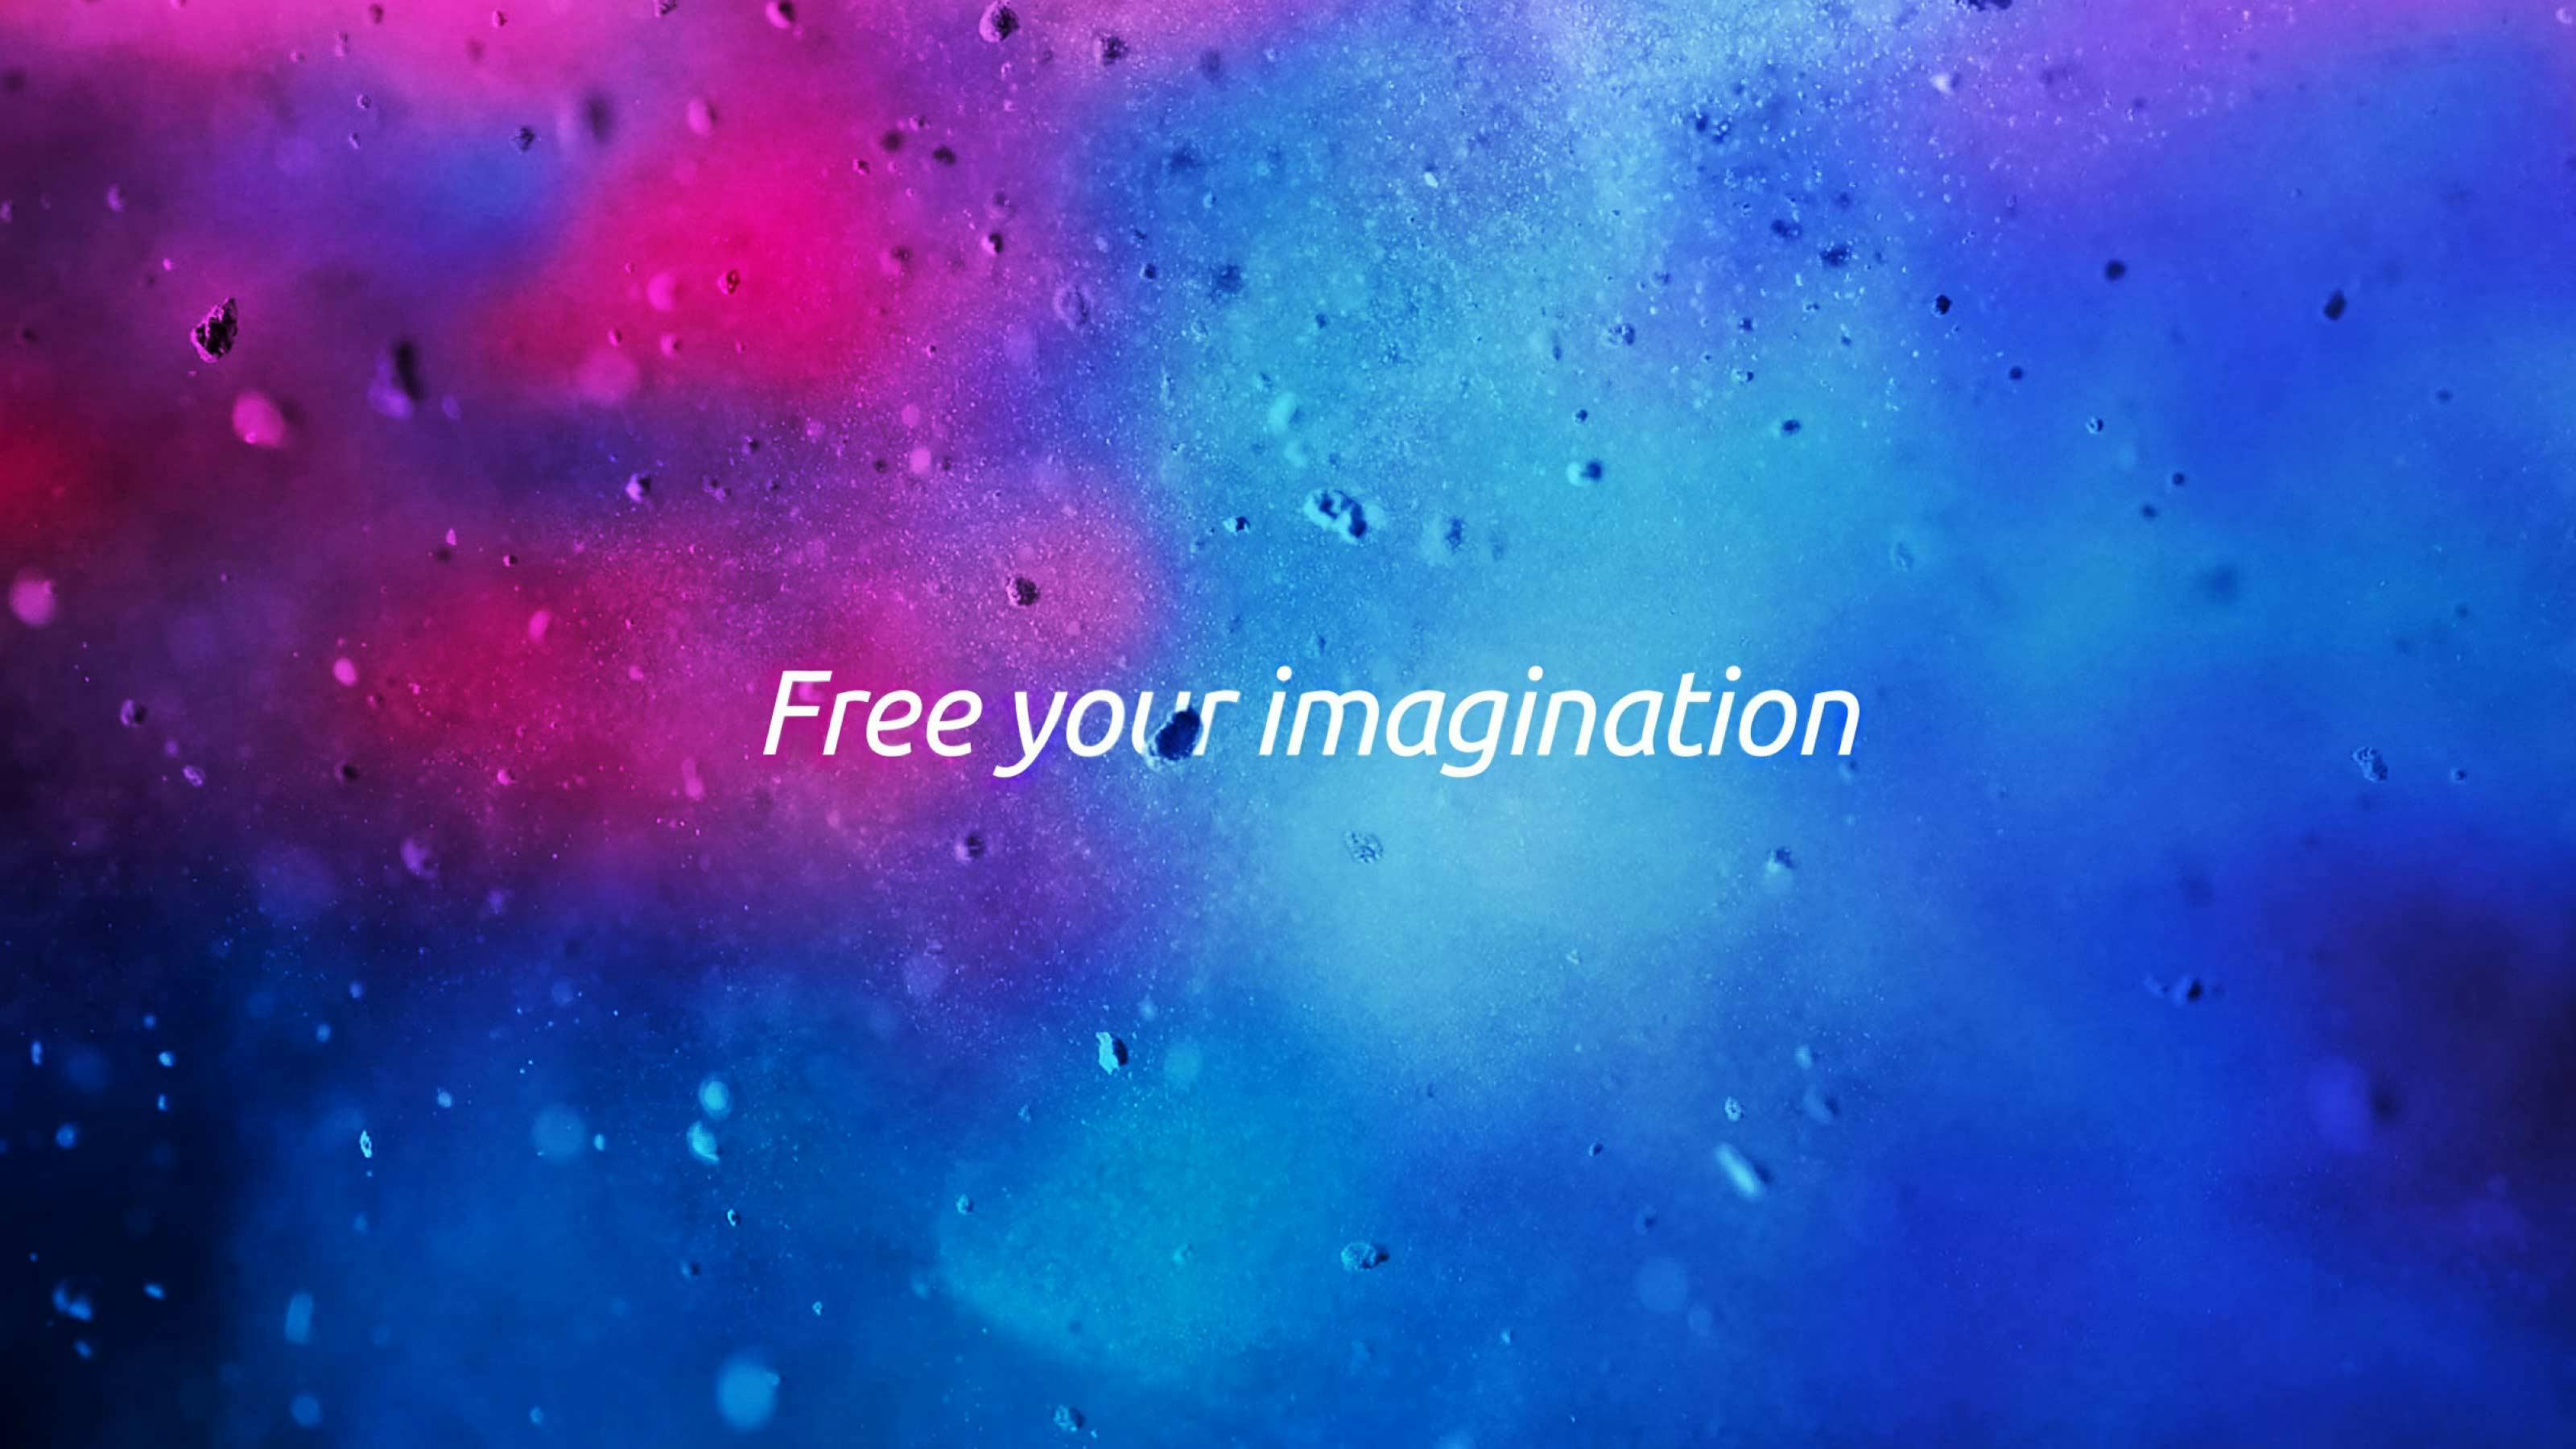 Odeon free your imagination frame